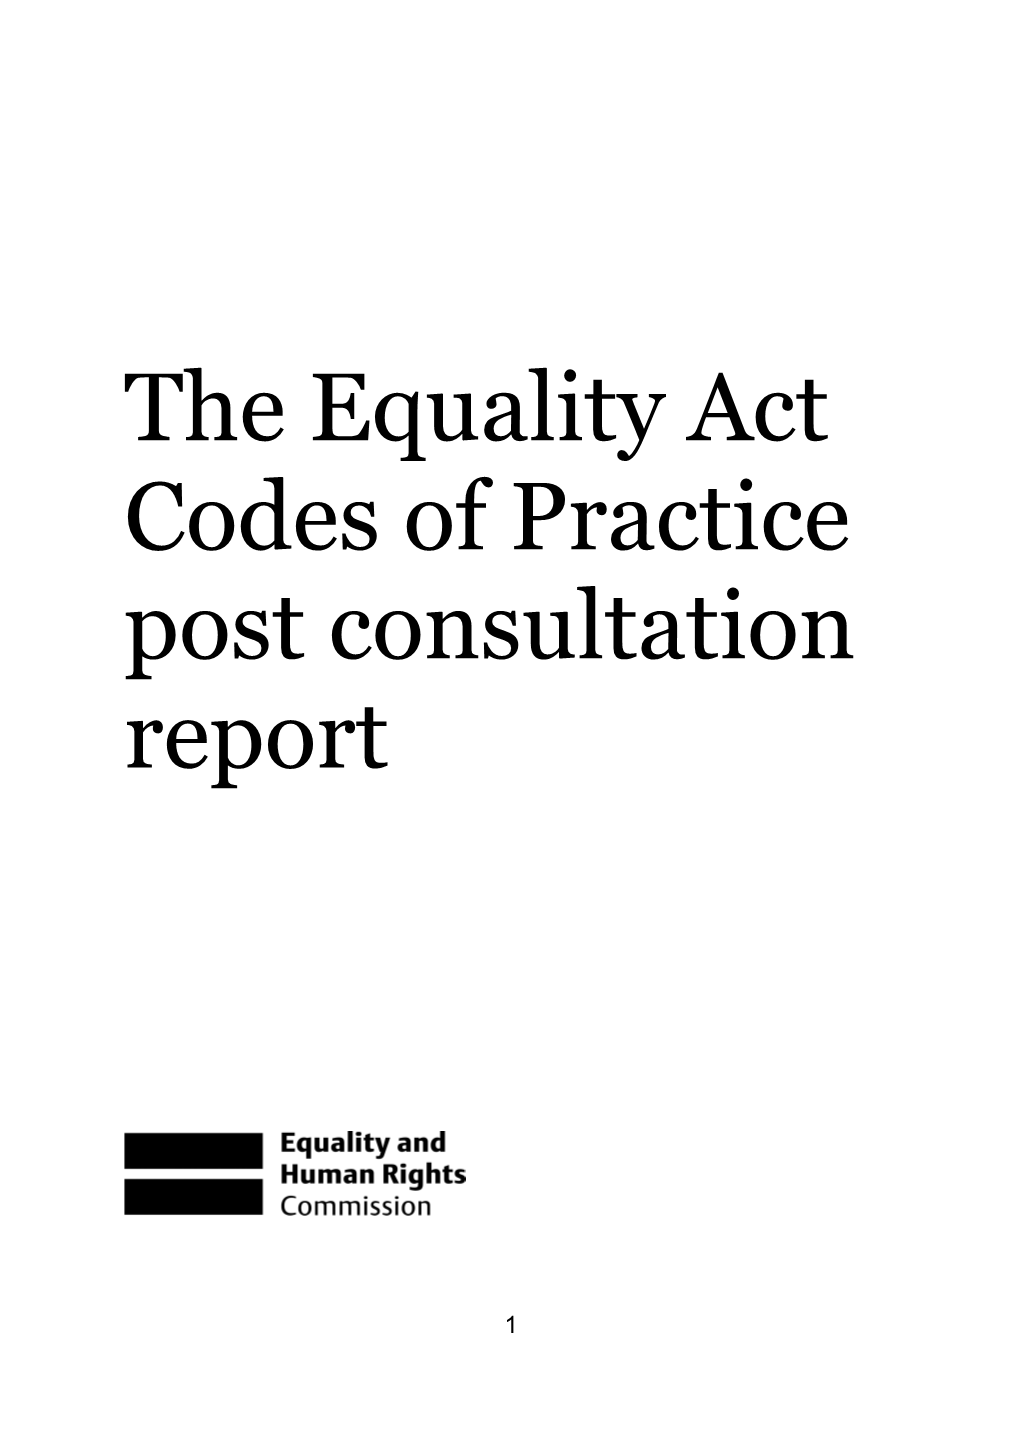 The Equality Act Codes of Practice Post Consultation Report